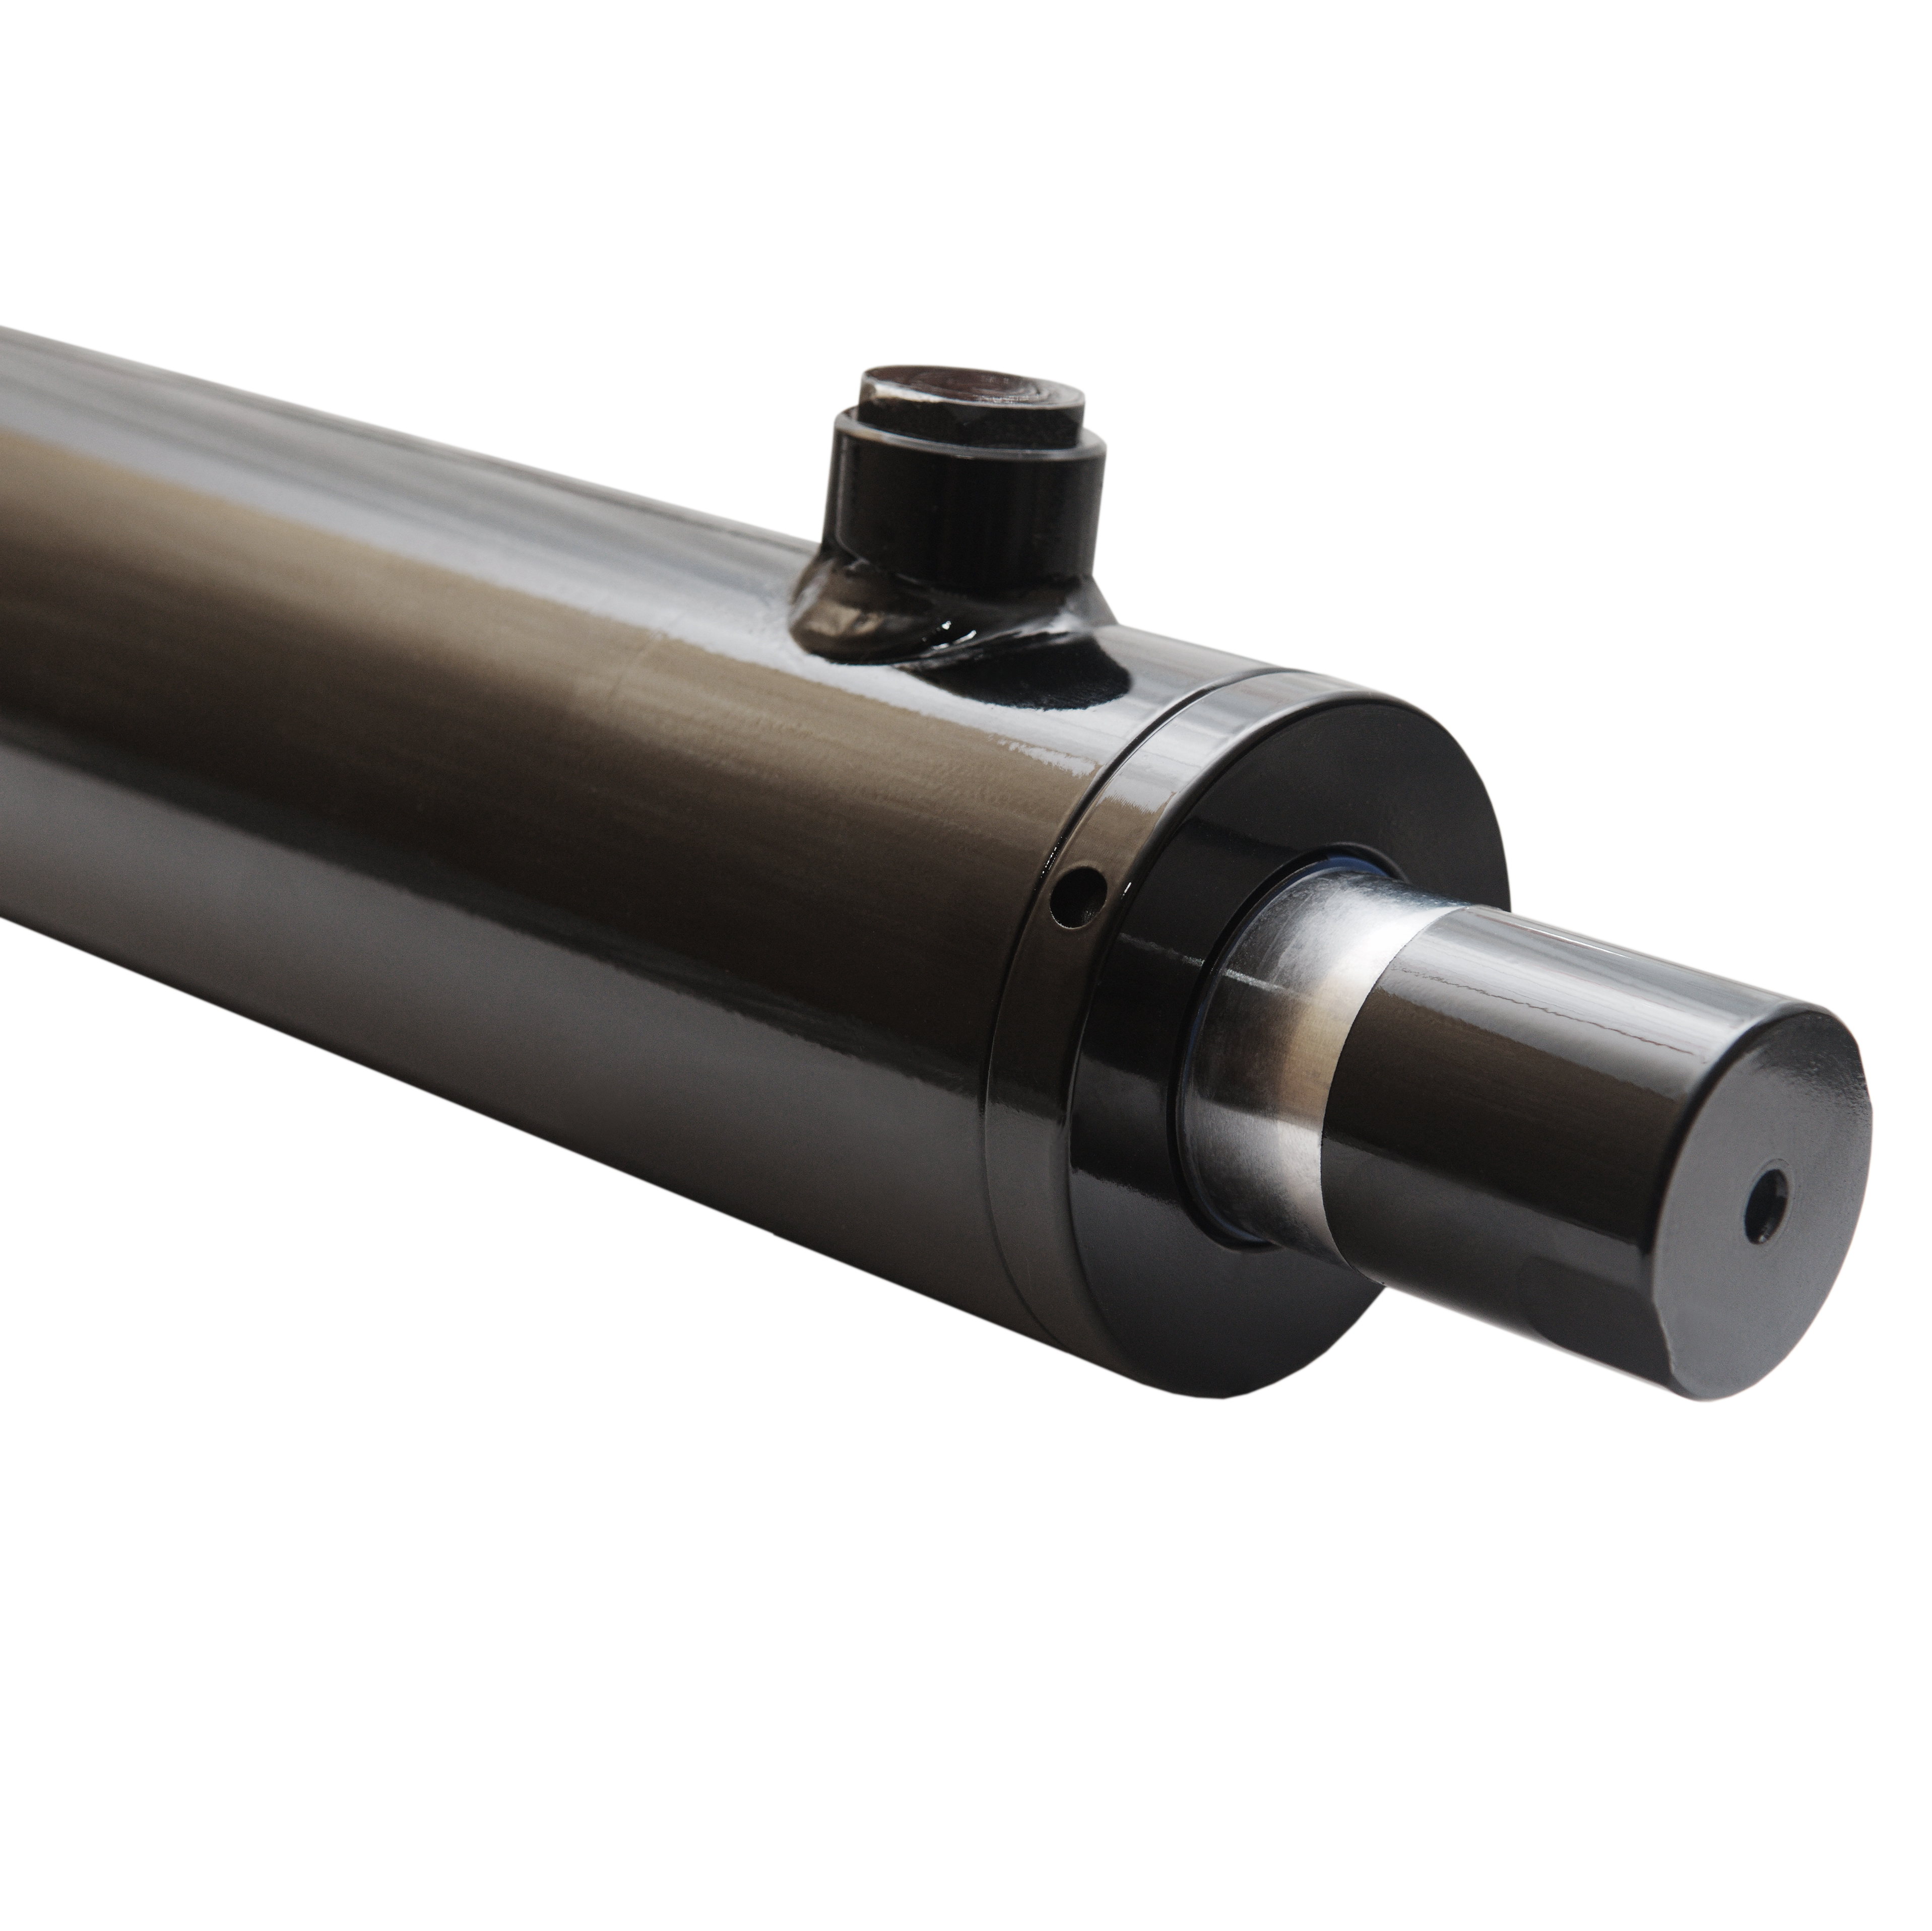 2.5 bore x 16 stroke hydraulic cylinder, welded universal double acting cylinder | Magister Hydraulics